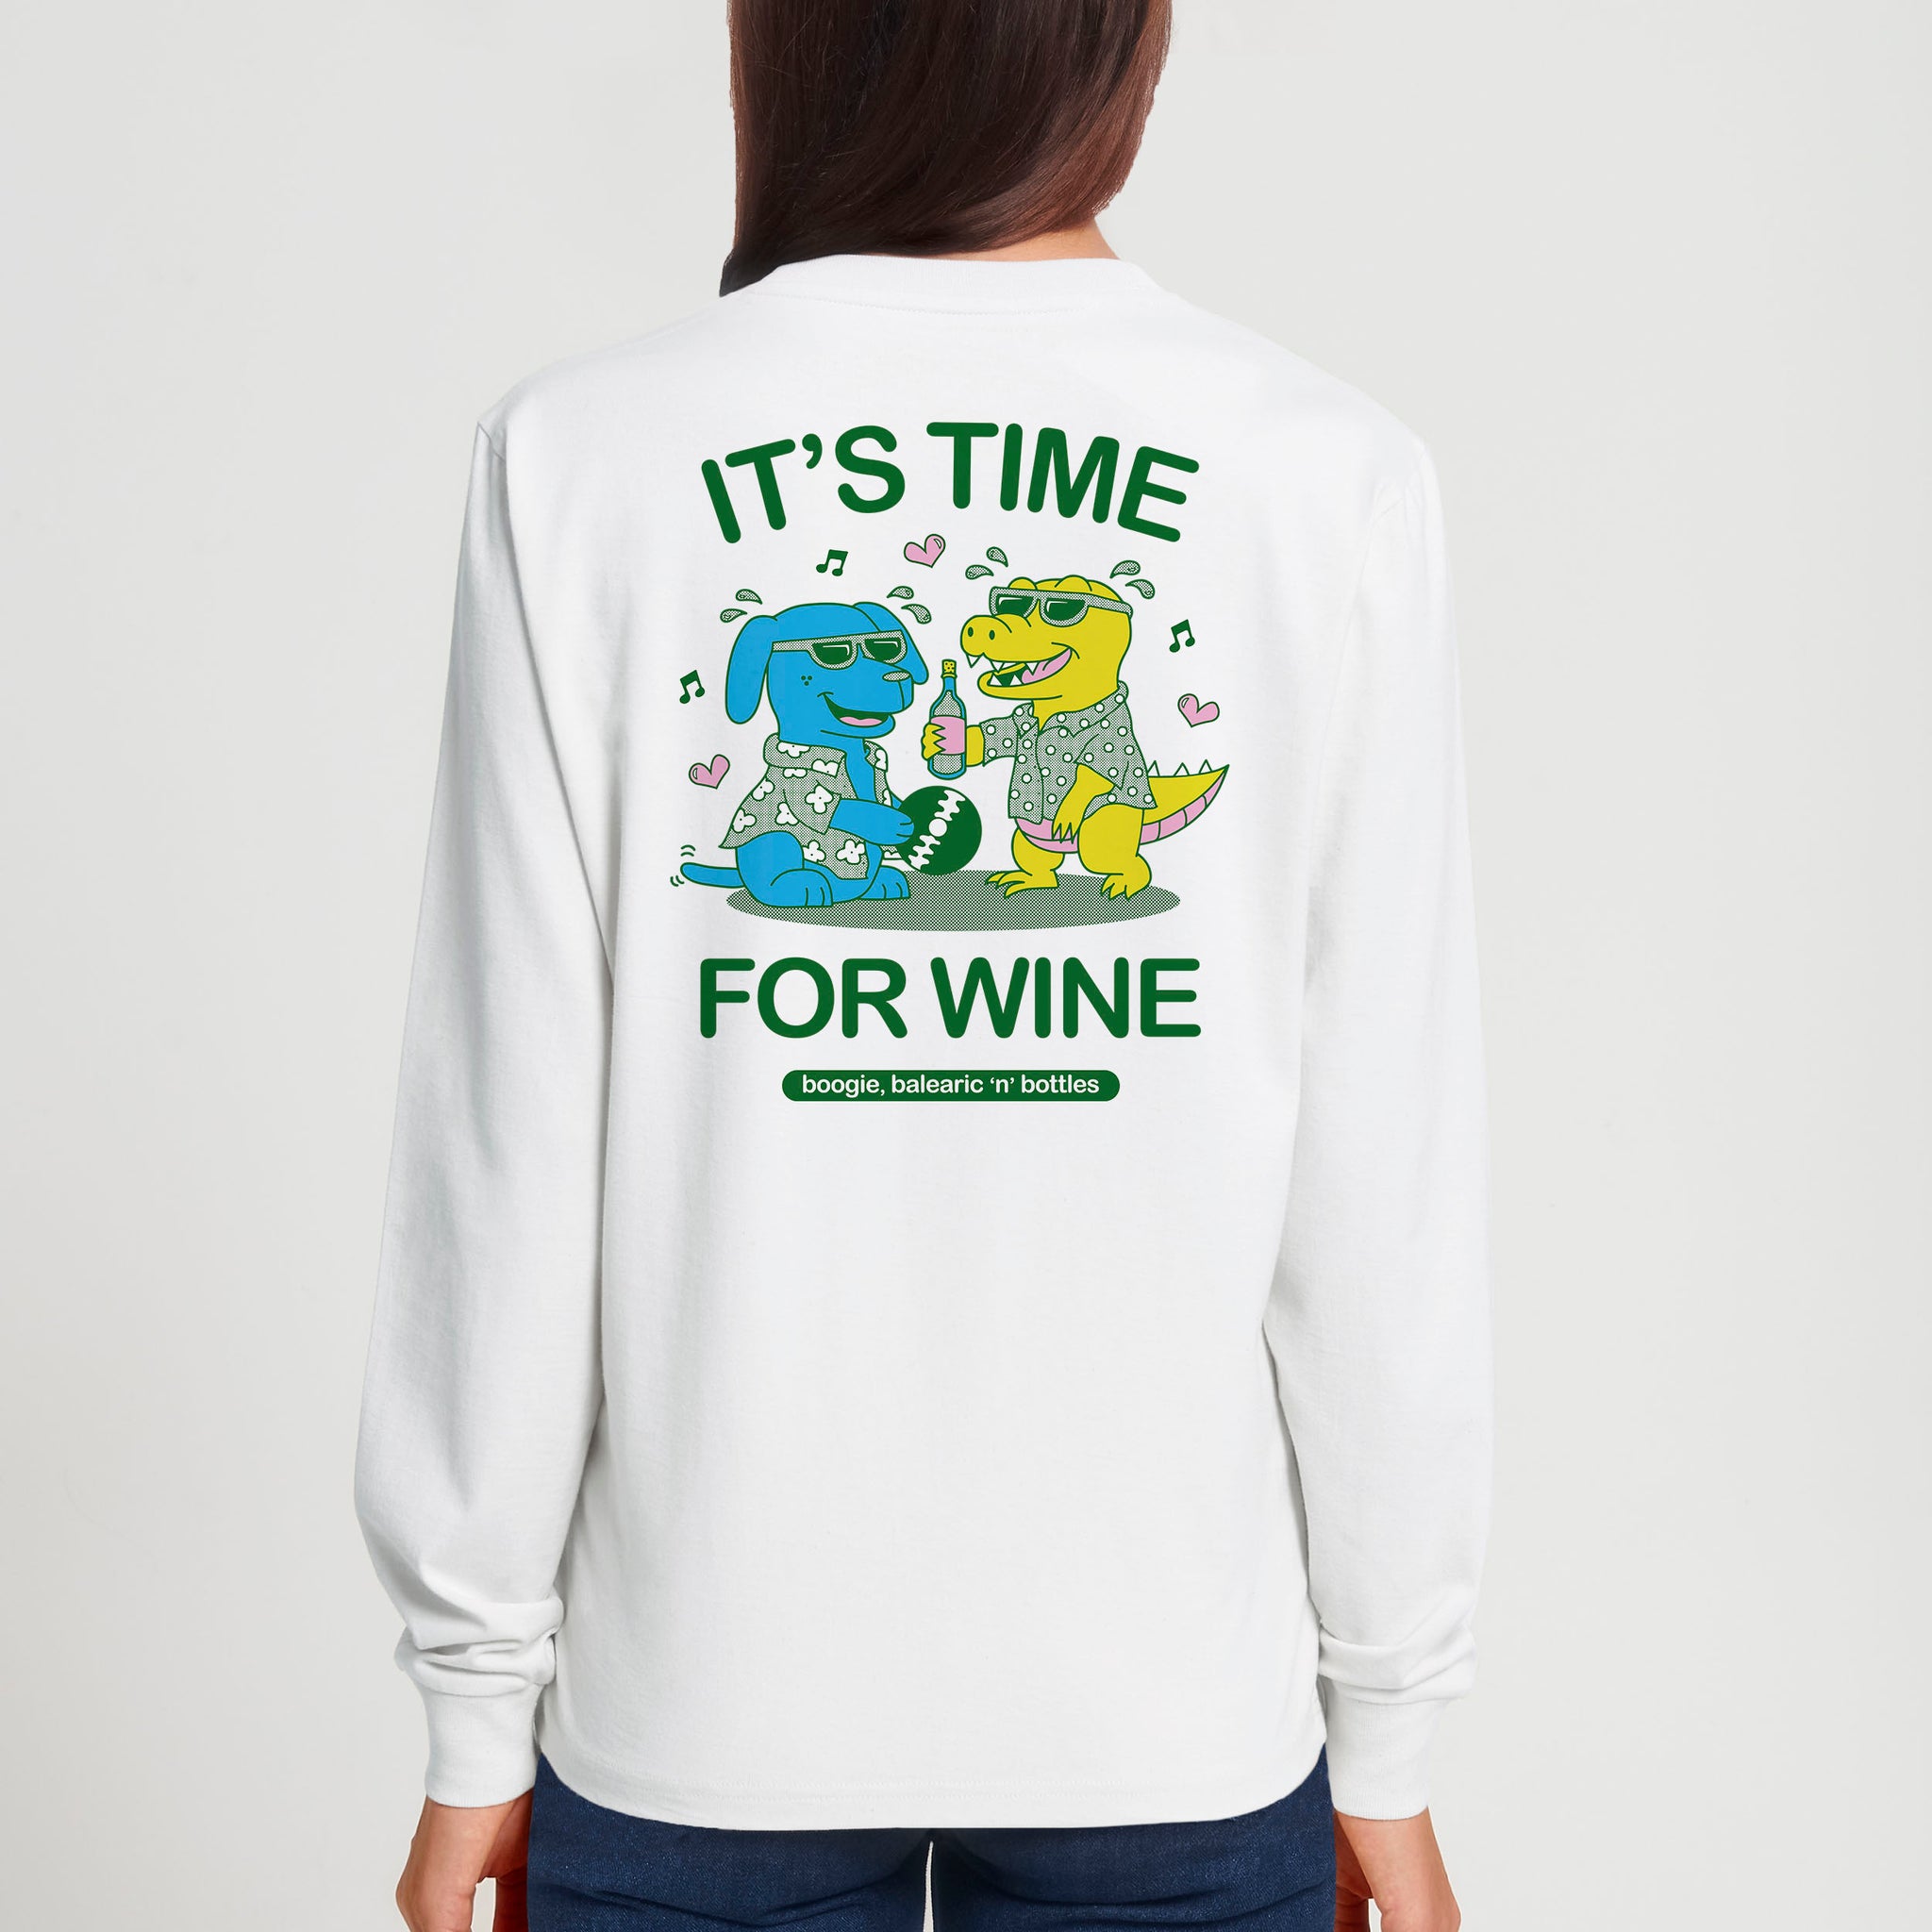 'It's Time For Wine' long sleeve T-shirt